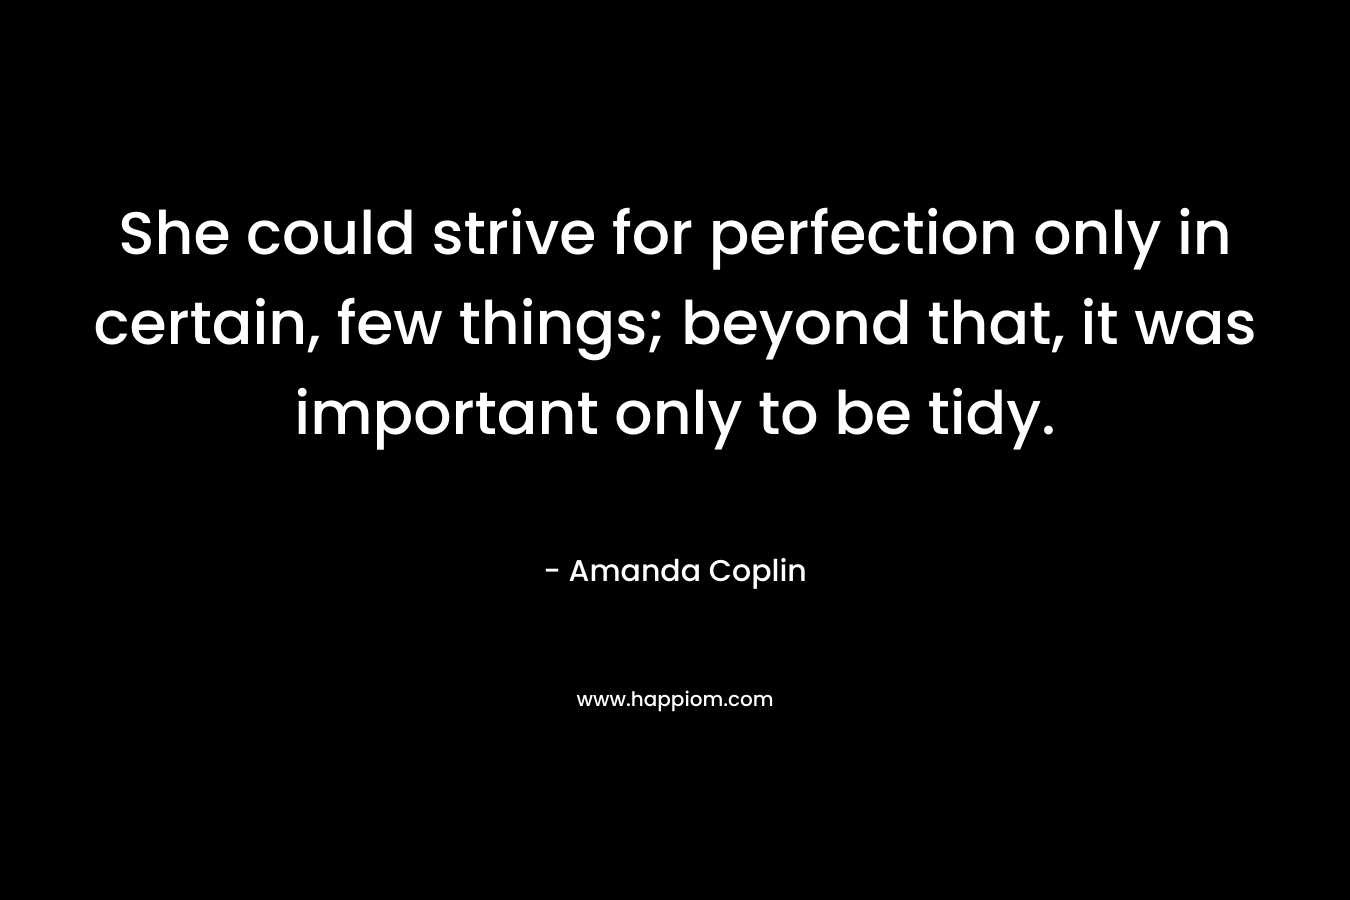 She could strive for perfection only in certain, few things; beyond that, it was important only to be tidy. – Amanda Coplin